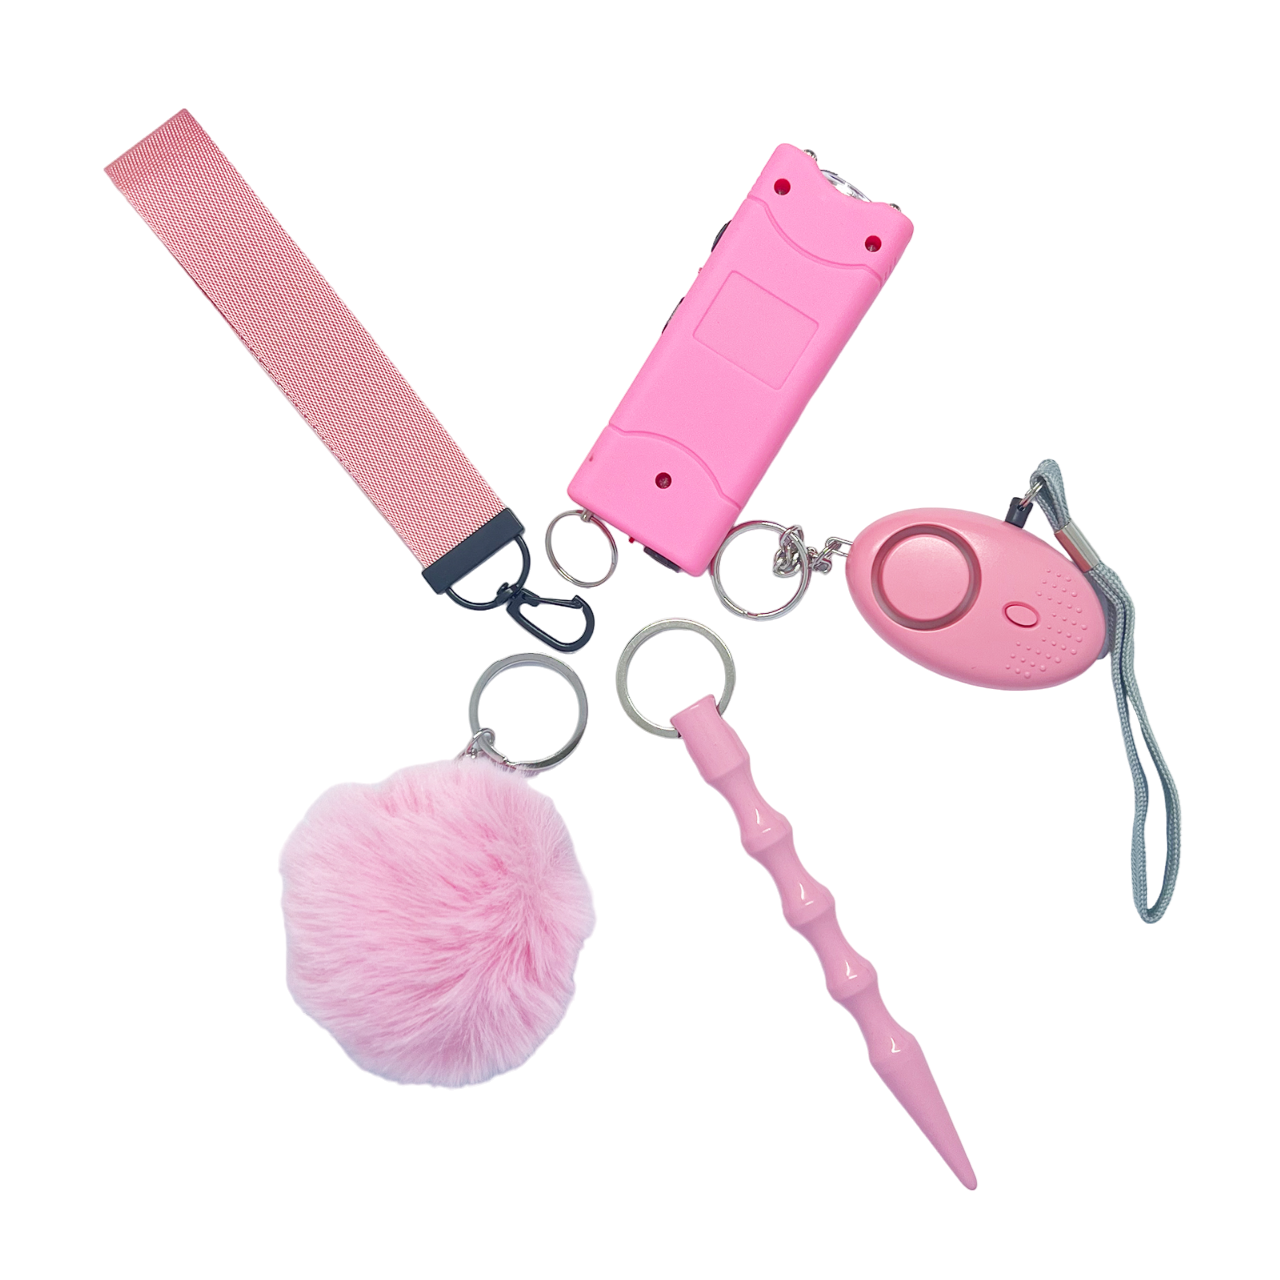 Core Protection Self Defense Keychain Kit